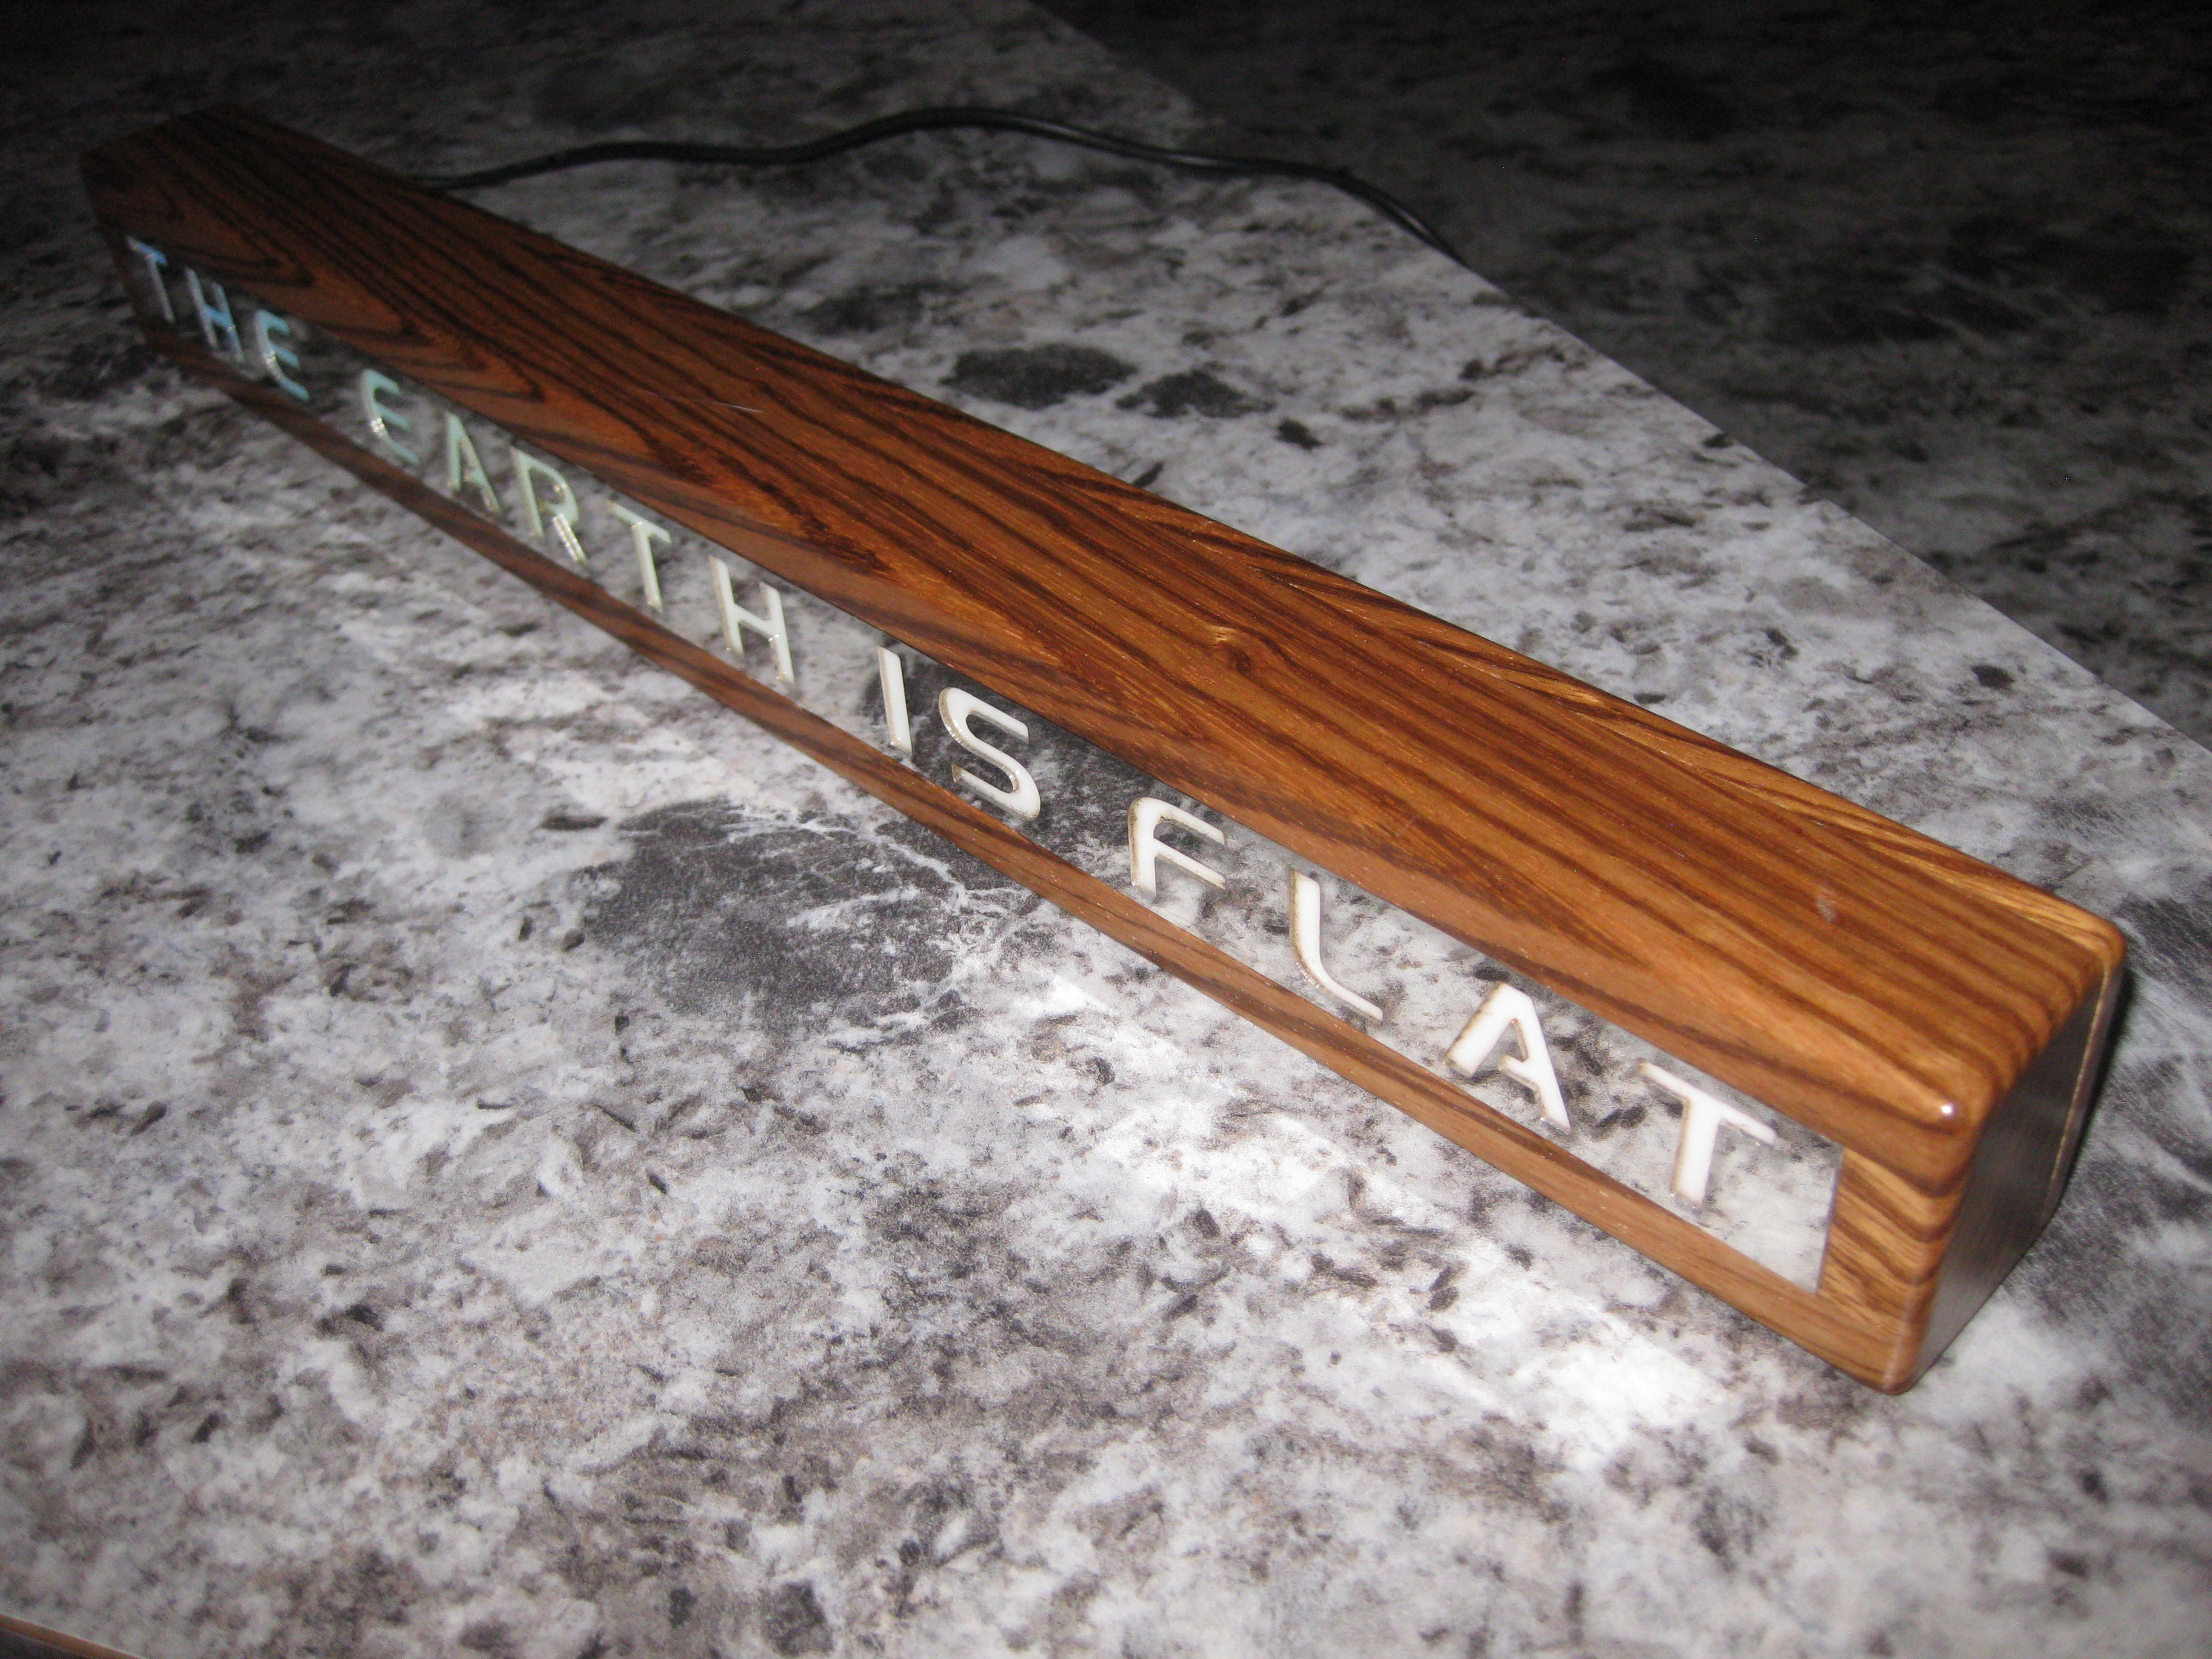 Zebrawood chase light marquee